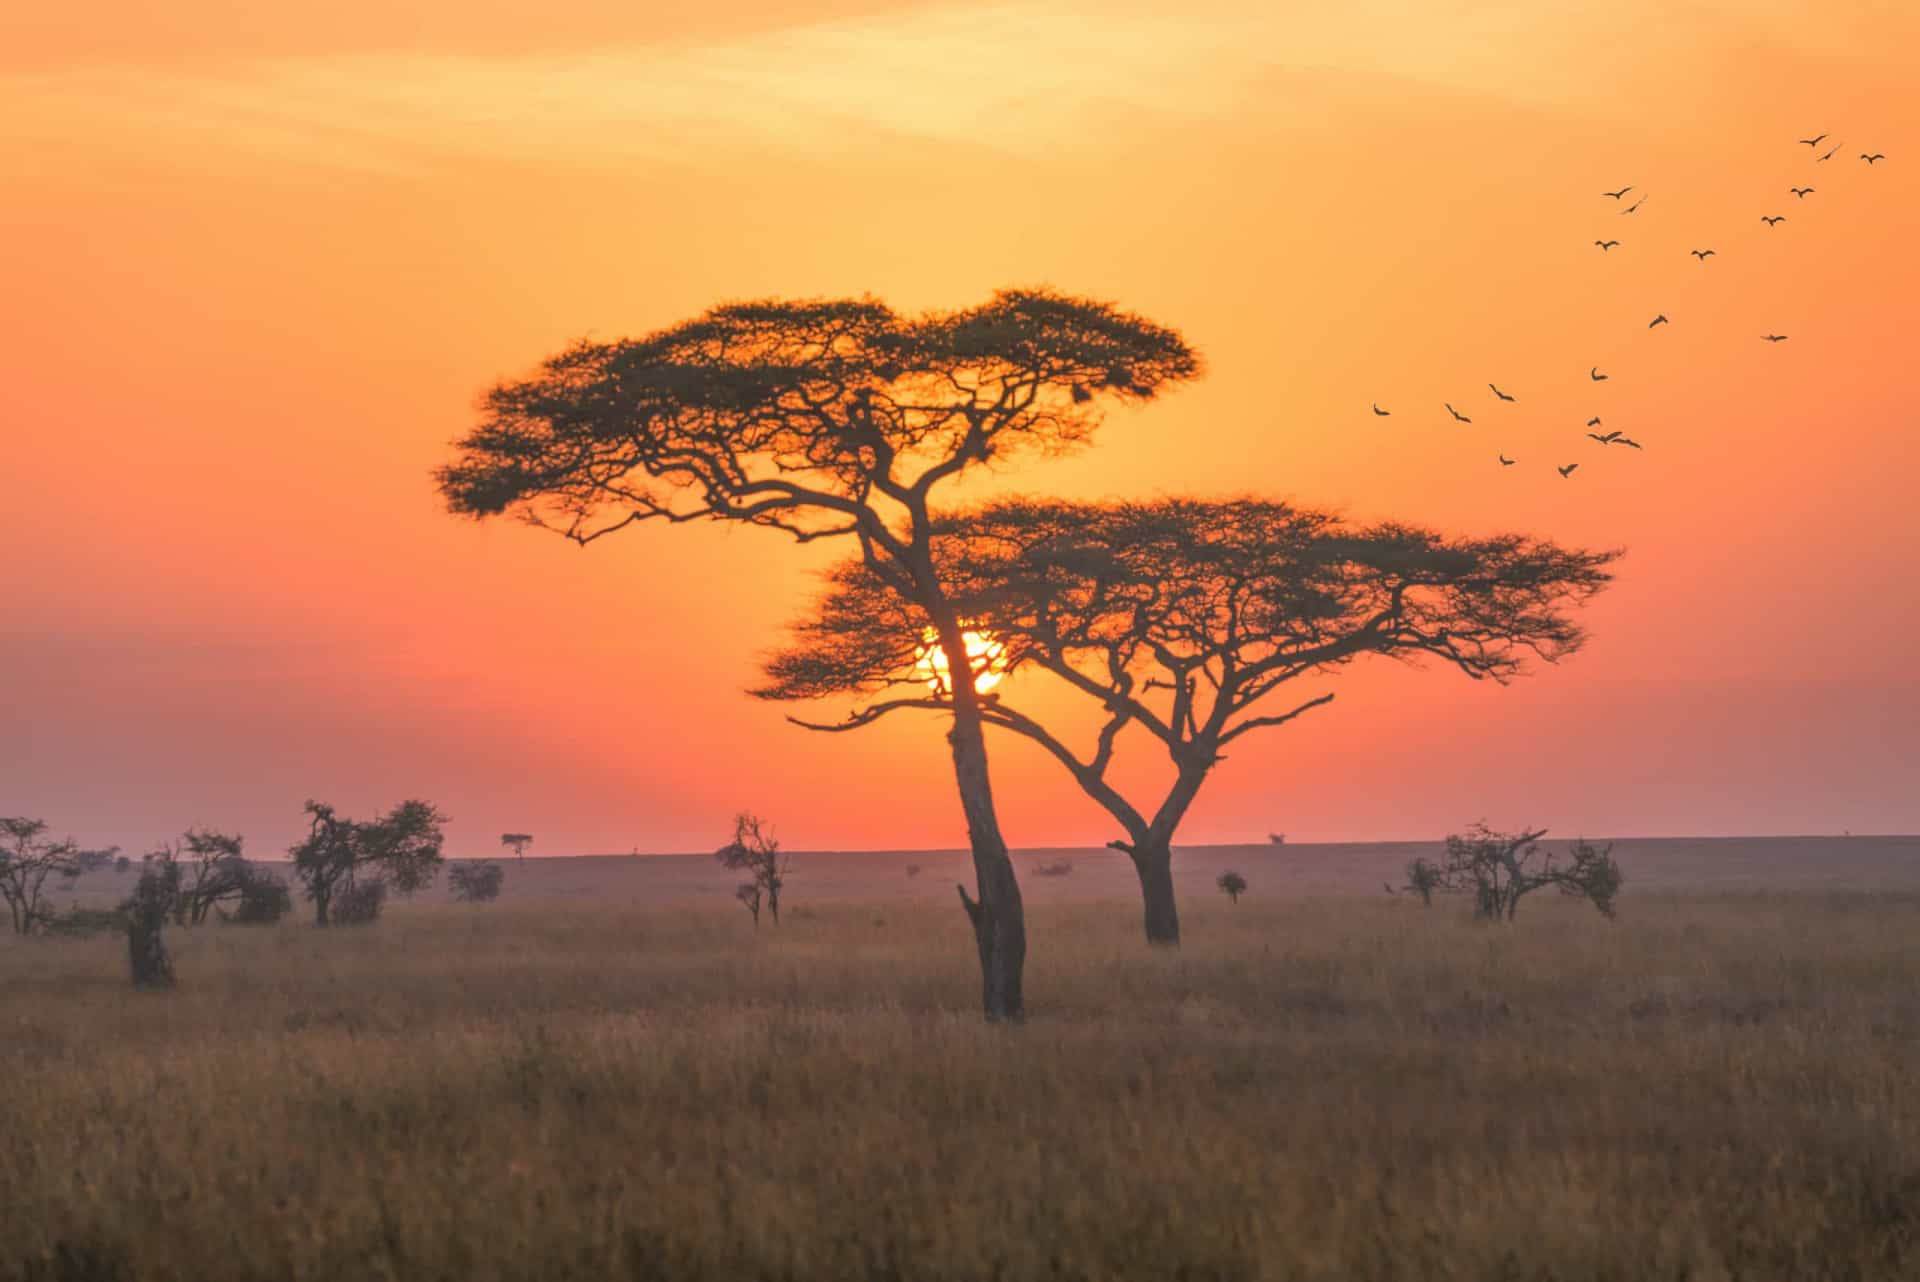 Two trees stand in front of a colorful sunset on a plain in Kenya